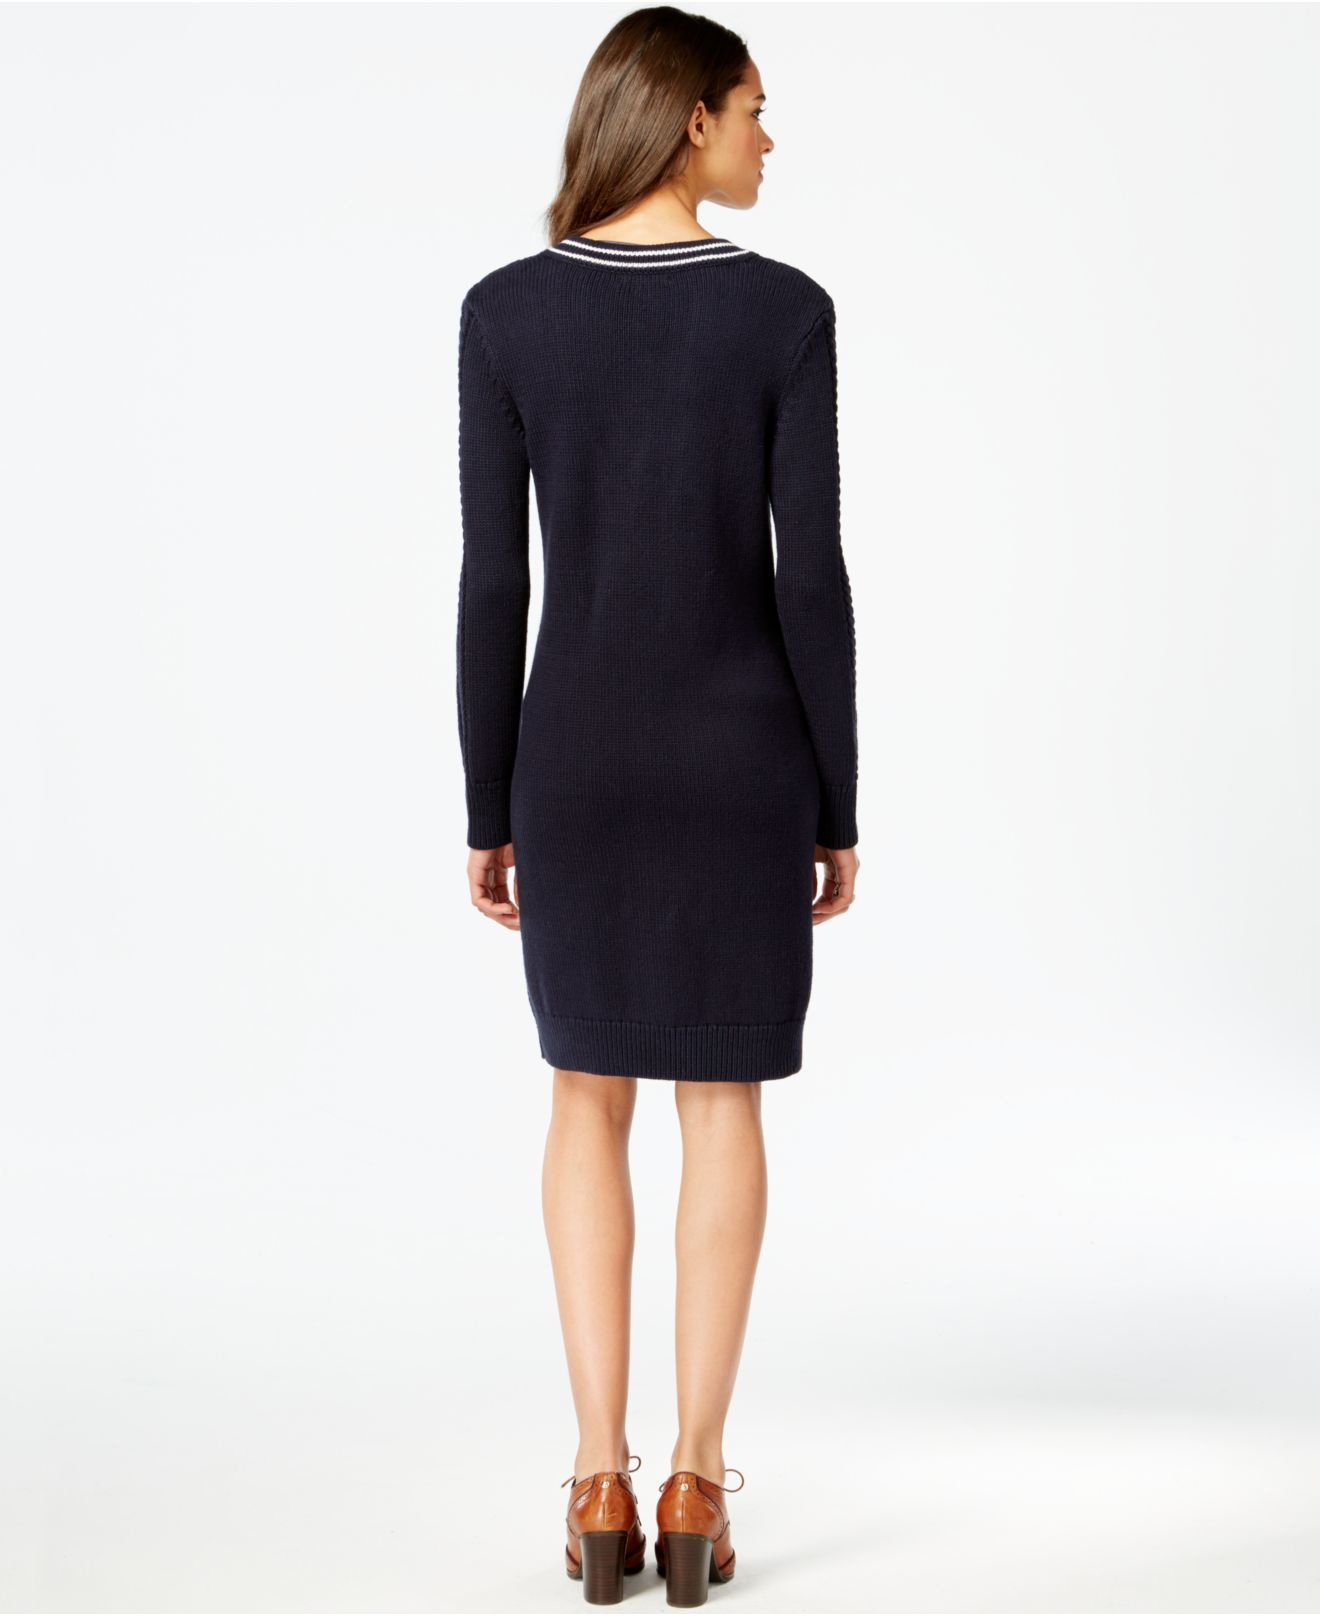 Lyst - Tommy Hilfiger Cable-knit V-neck Sweater Dress in Blue